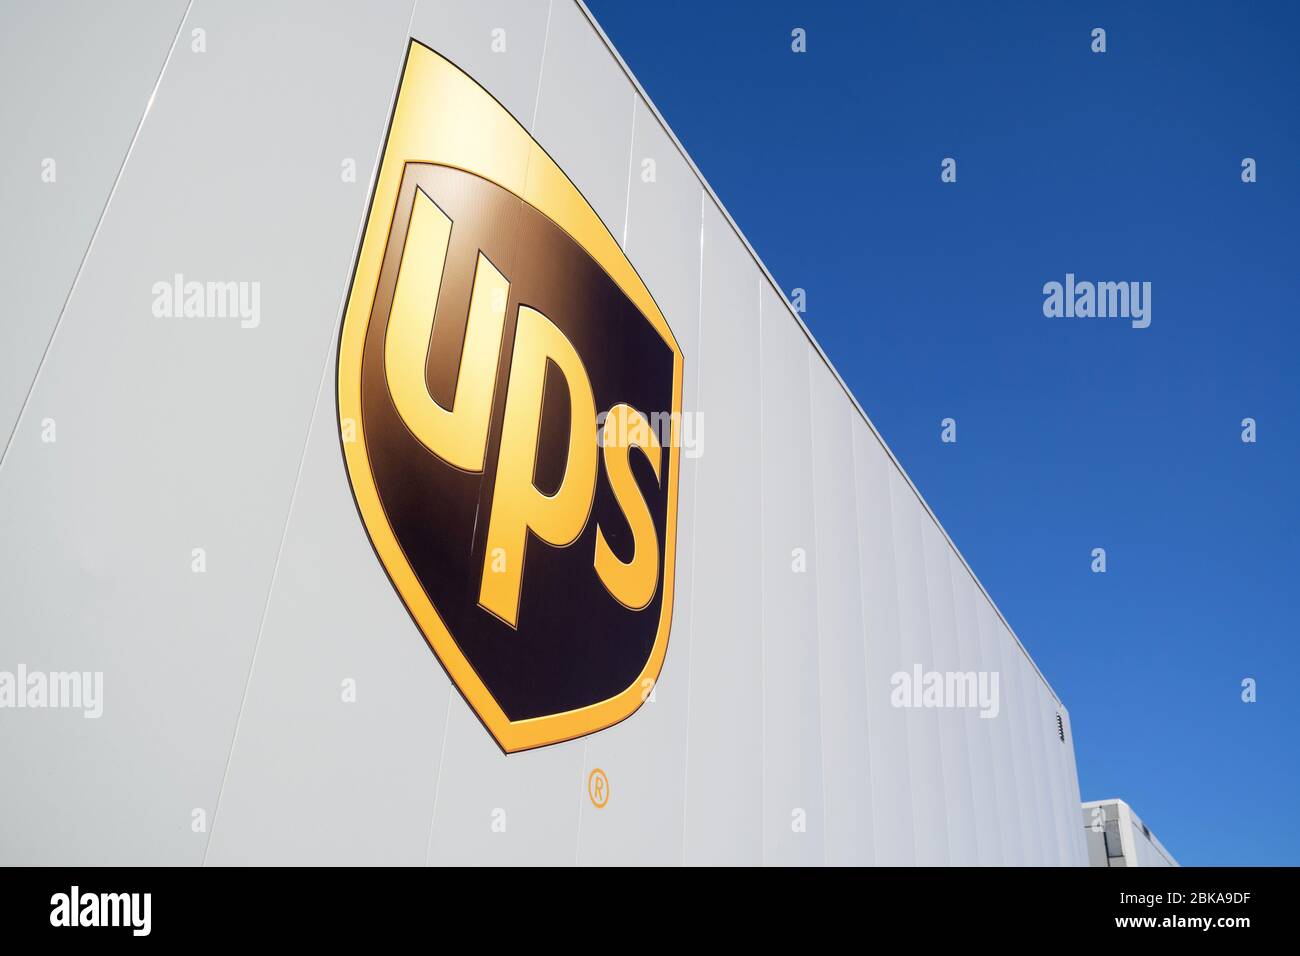 UPS truck. UPS is the world's largest package delivery company and a provider of supply chain management solutions. Stock Photo